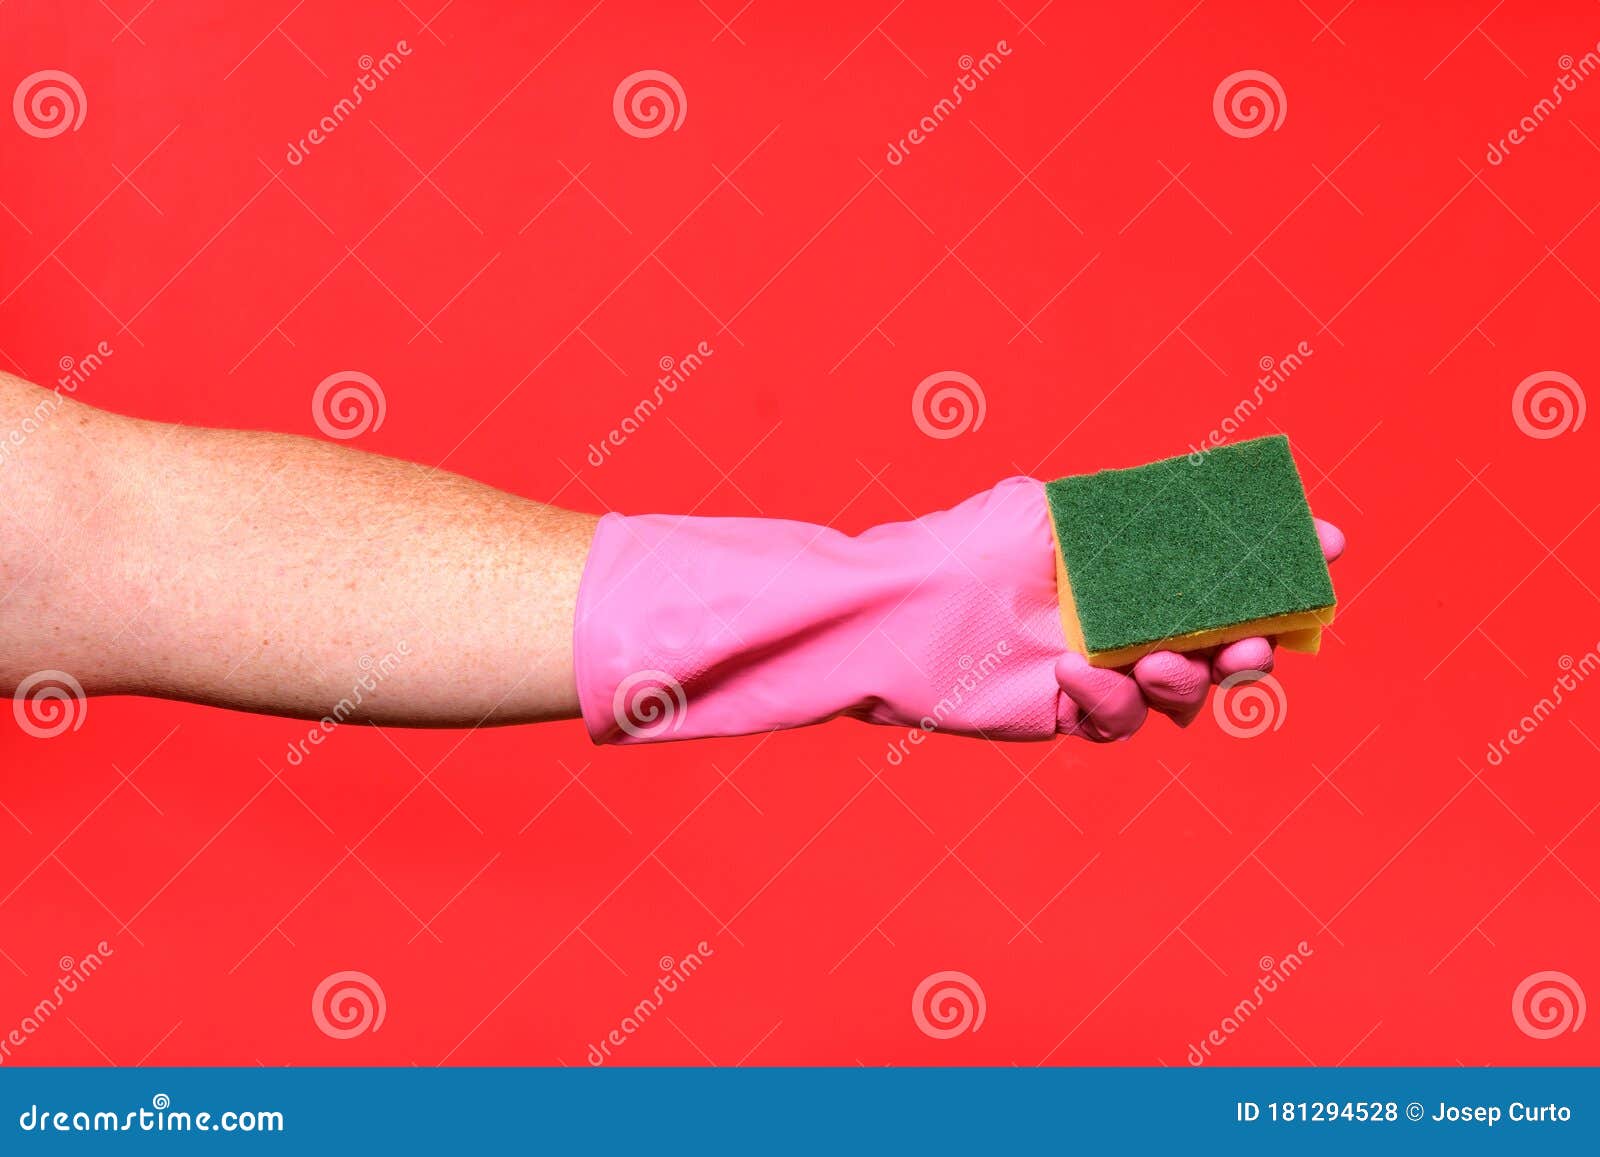 hand with glove hoding scourer on red background